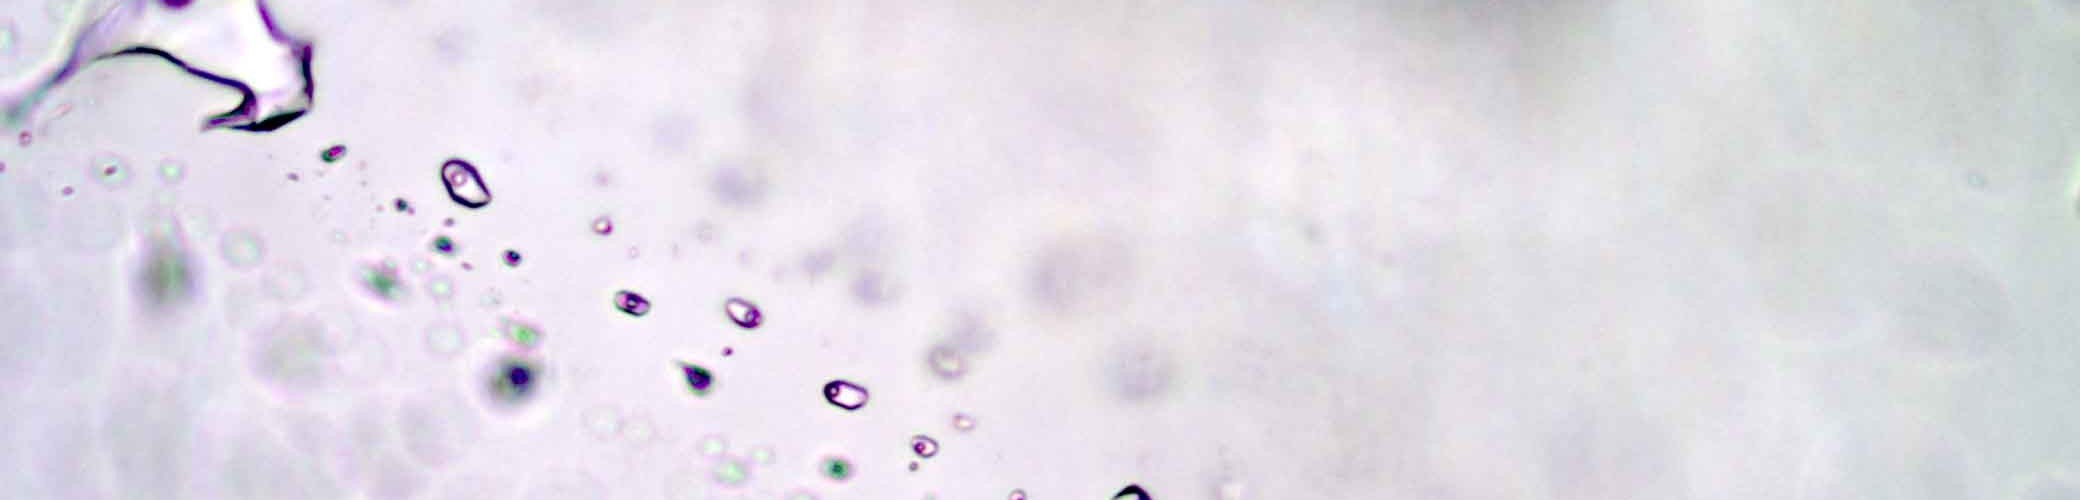 Image inclusions fluides 4 - microthermo